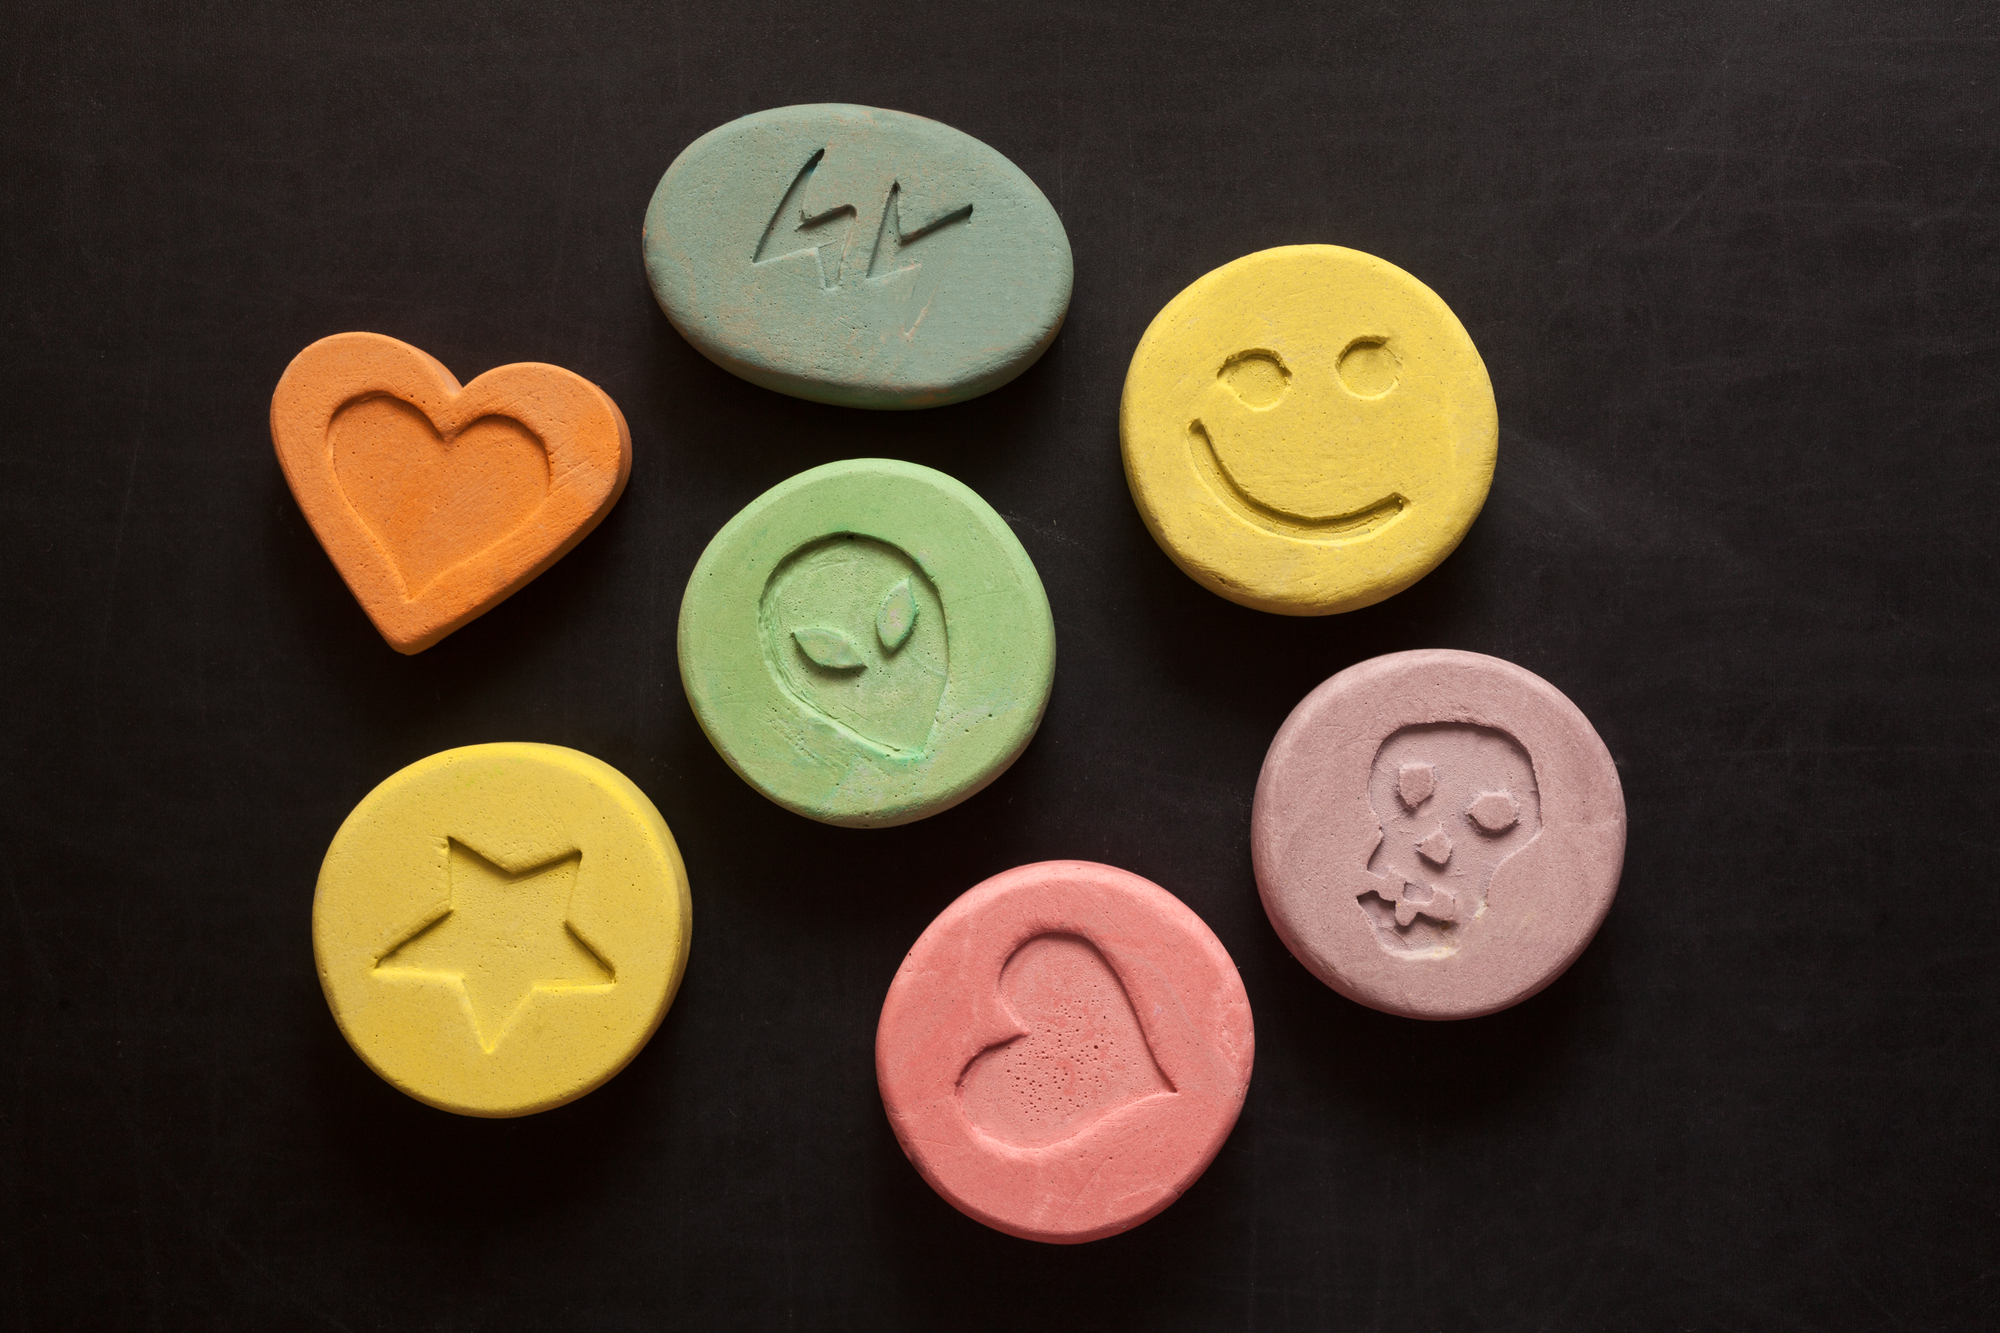 Ecstasy is a tool, not a cure-all, for healing trauma